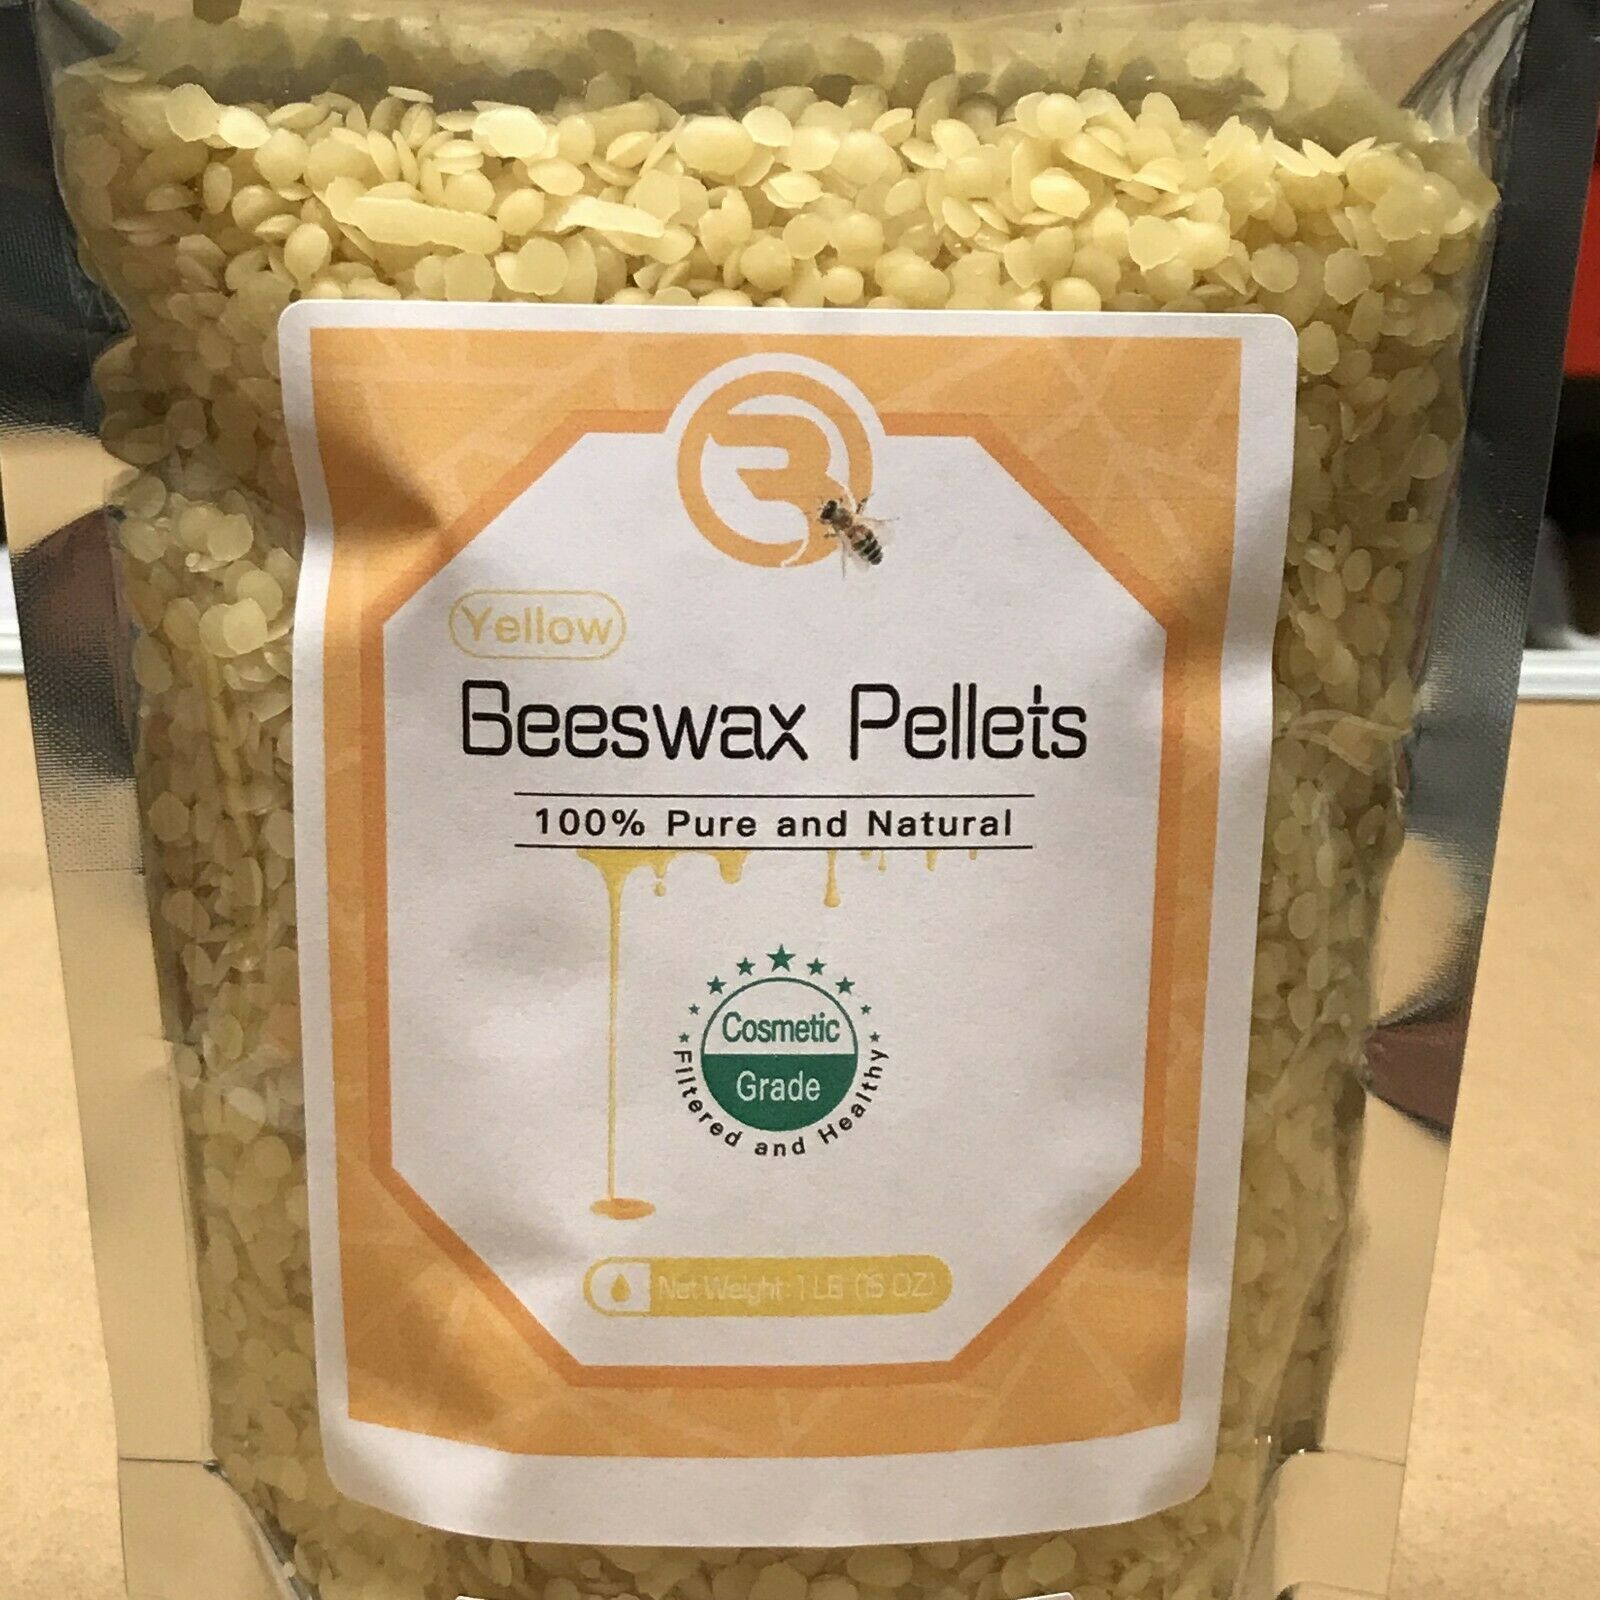 BEESWAX BLOCK ALL NATURAL UNFILTERED 0.75lbs or More.